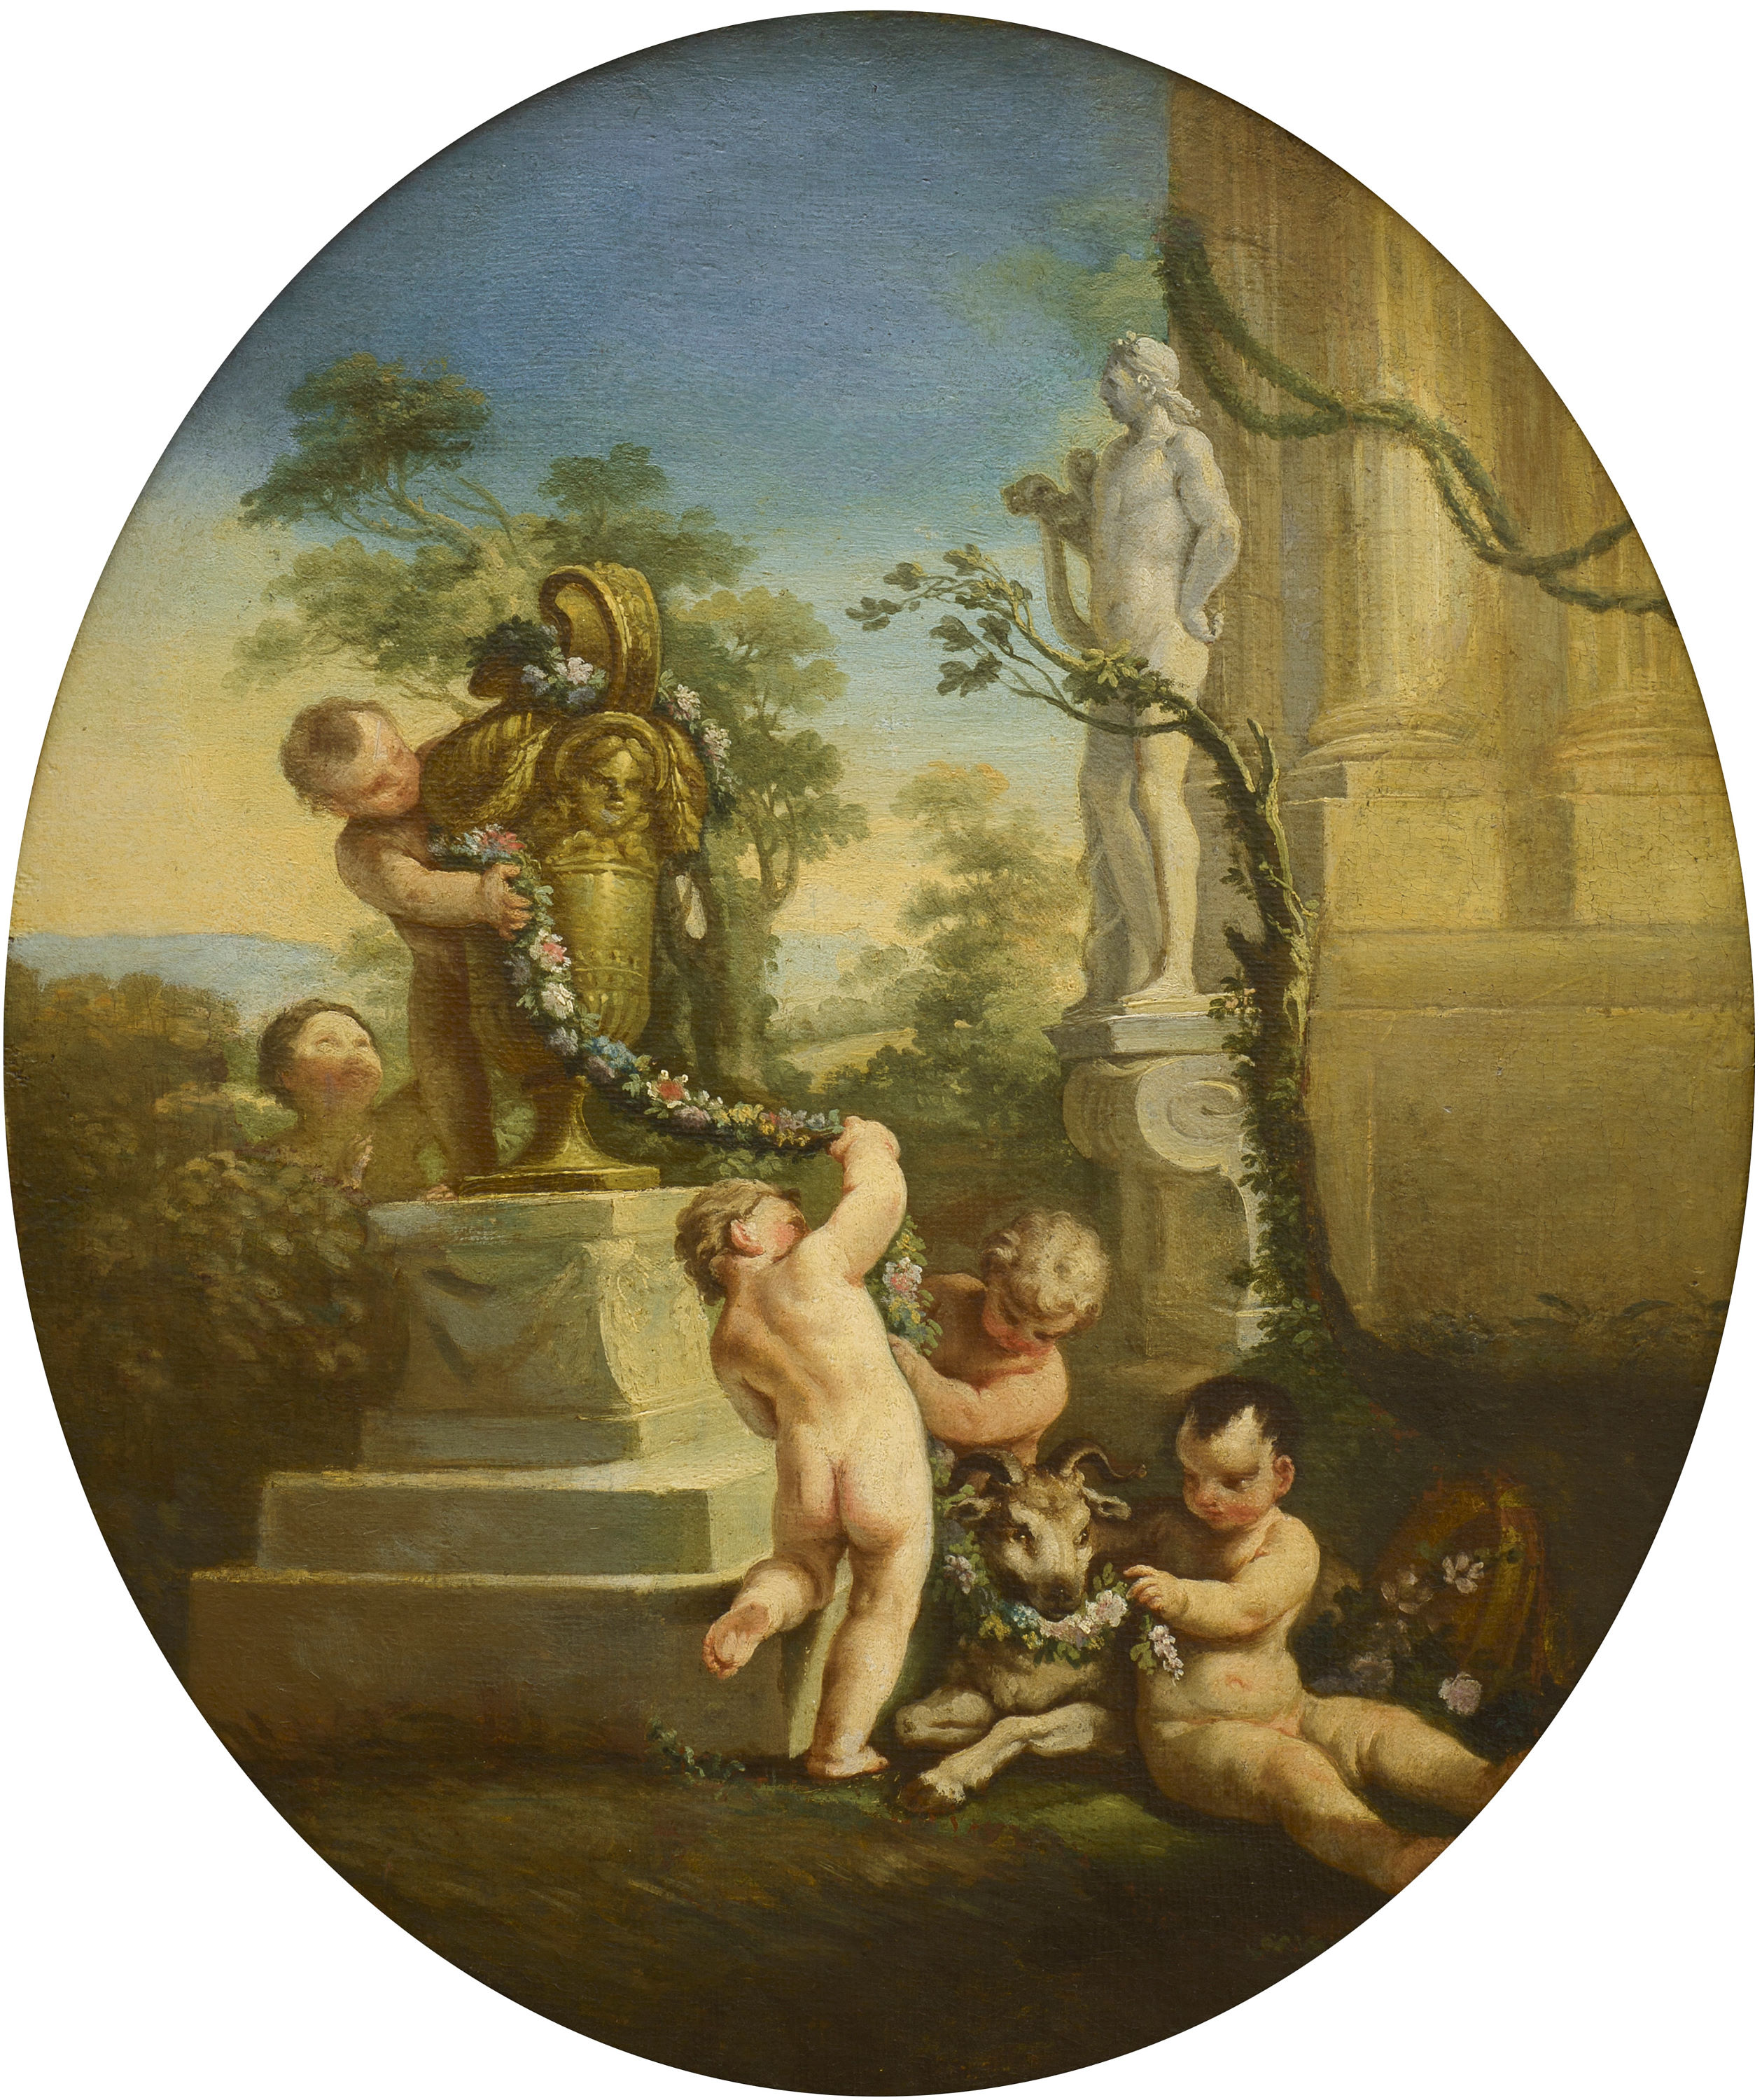 <p><strong>Jacopo Amigioni</strong><br />
<em>Bacchanals II</em><br />
Auckland Art Gallery Toi o Tāmaki&nbsp;<br />
Gift of Sir George Grey, 1887</p>
